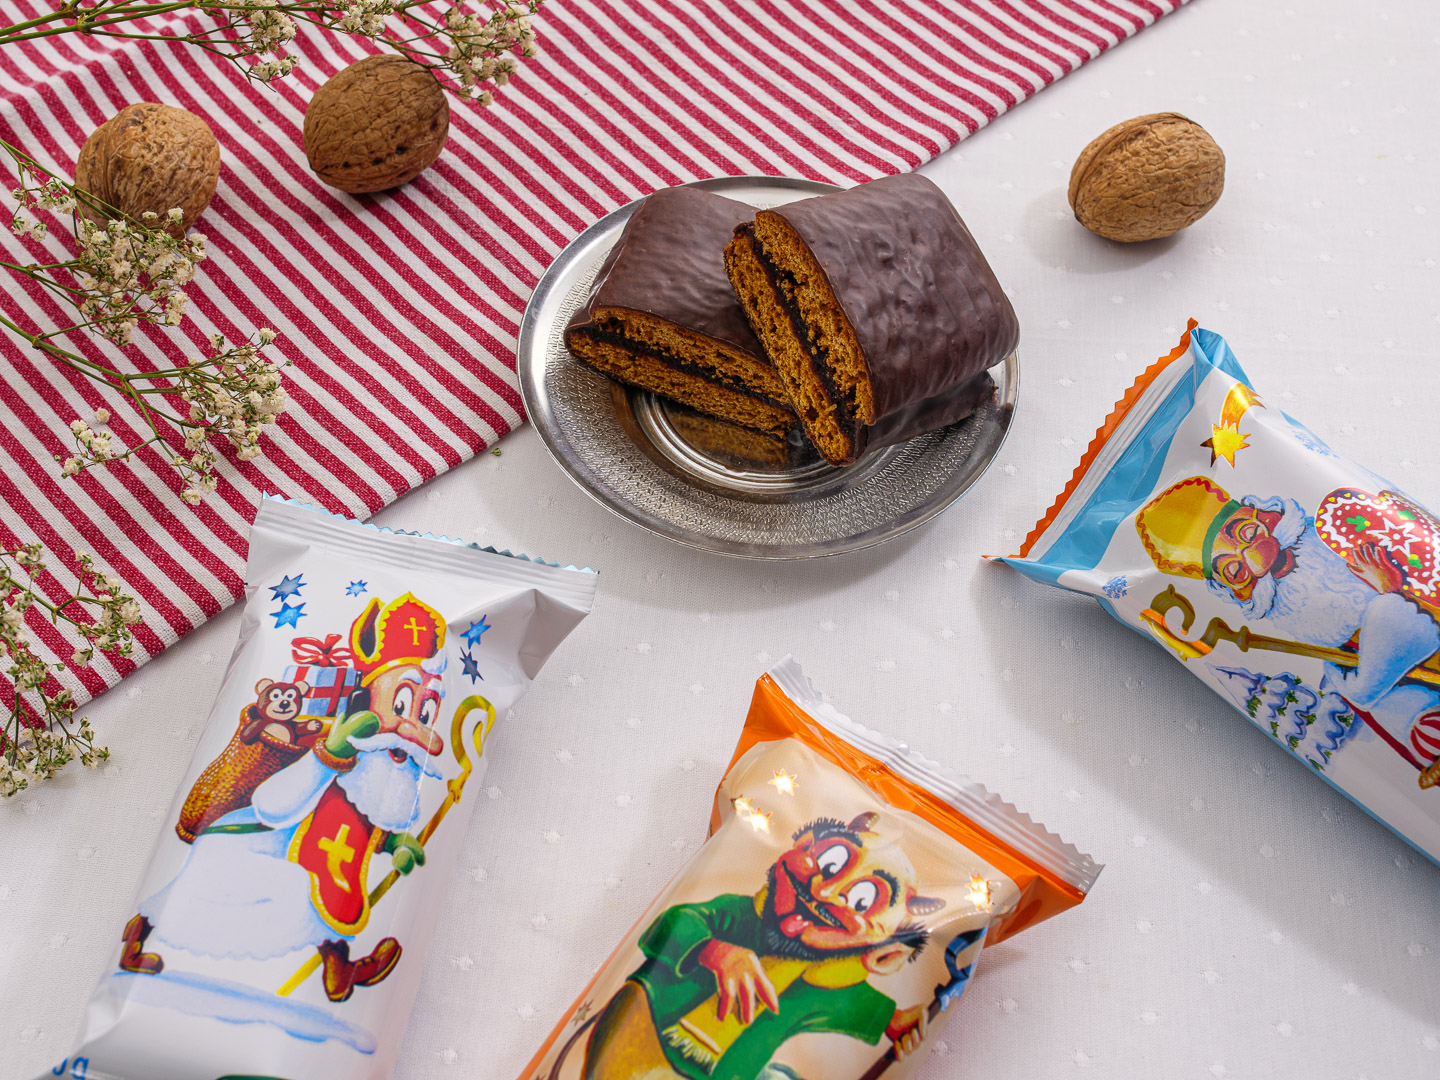 St. Nicholas Day Gift gingerbread